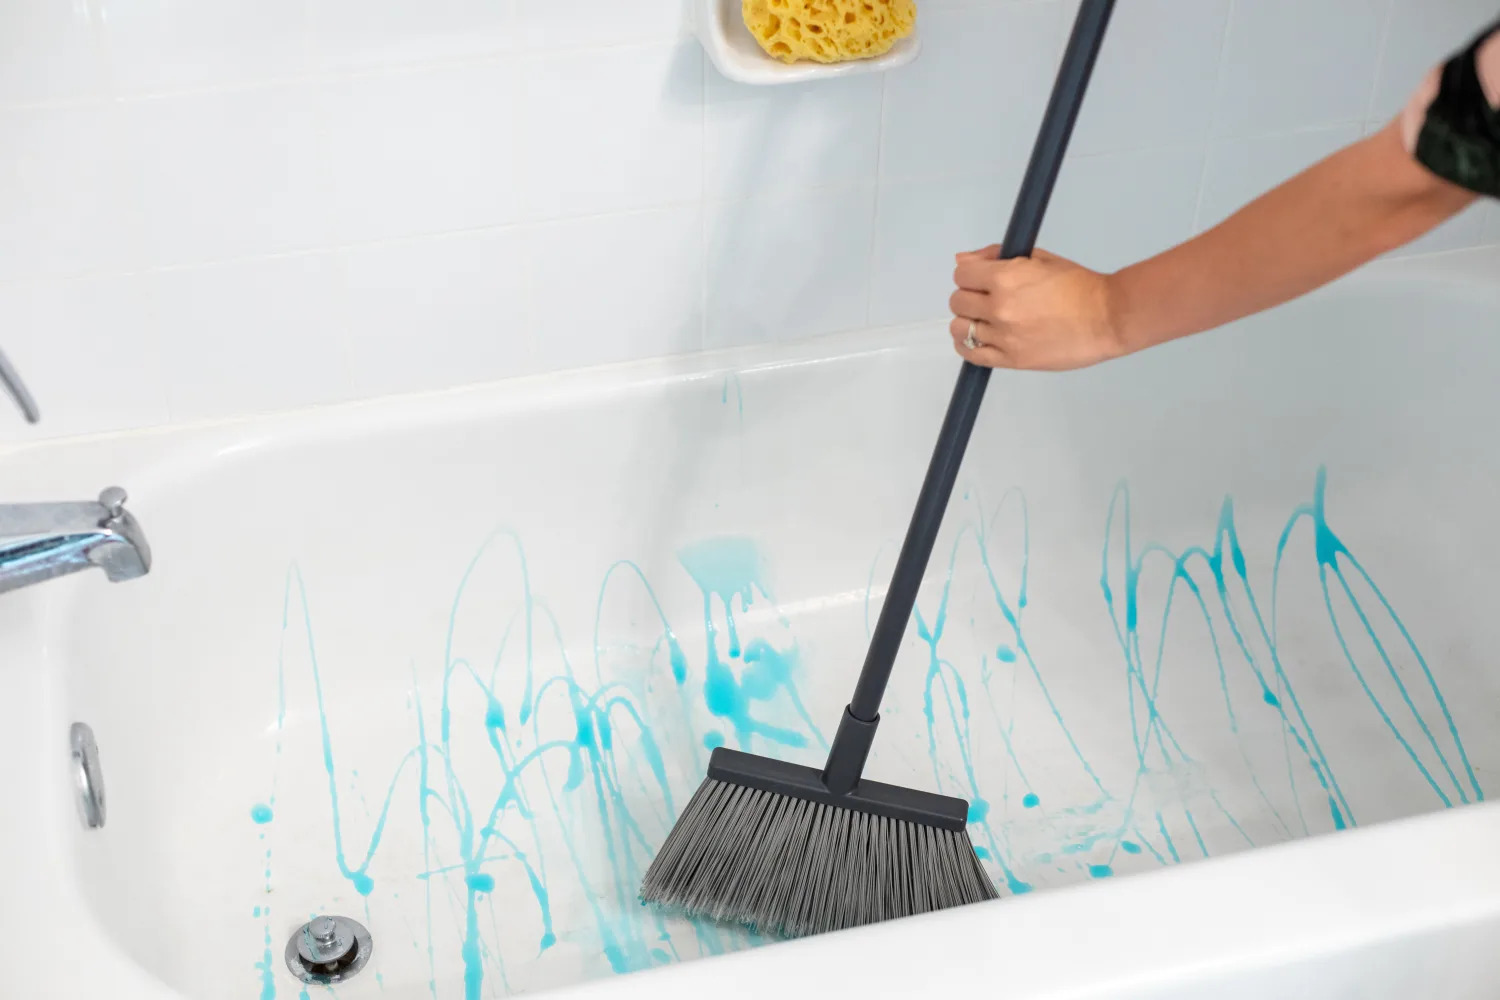 What Cleans A Bathtub The Best?